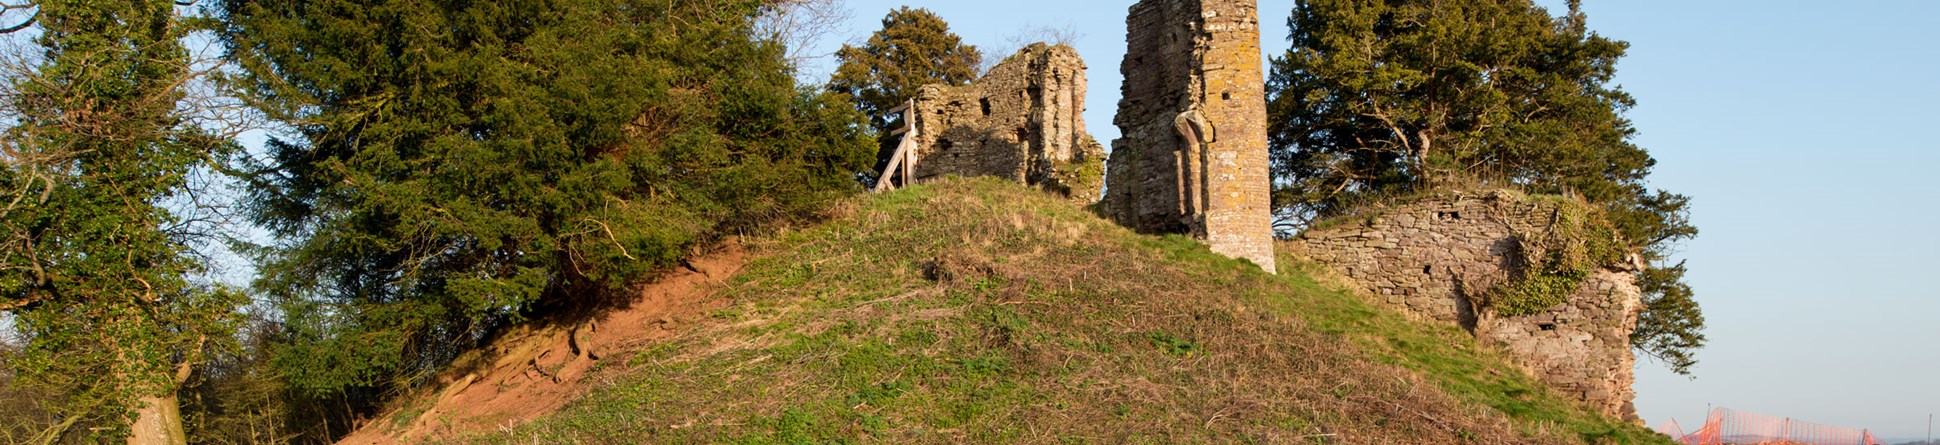 View of a ruined motte and bailley castle partly overgrown with trees.